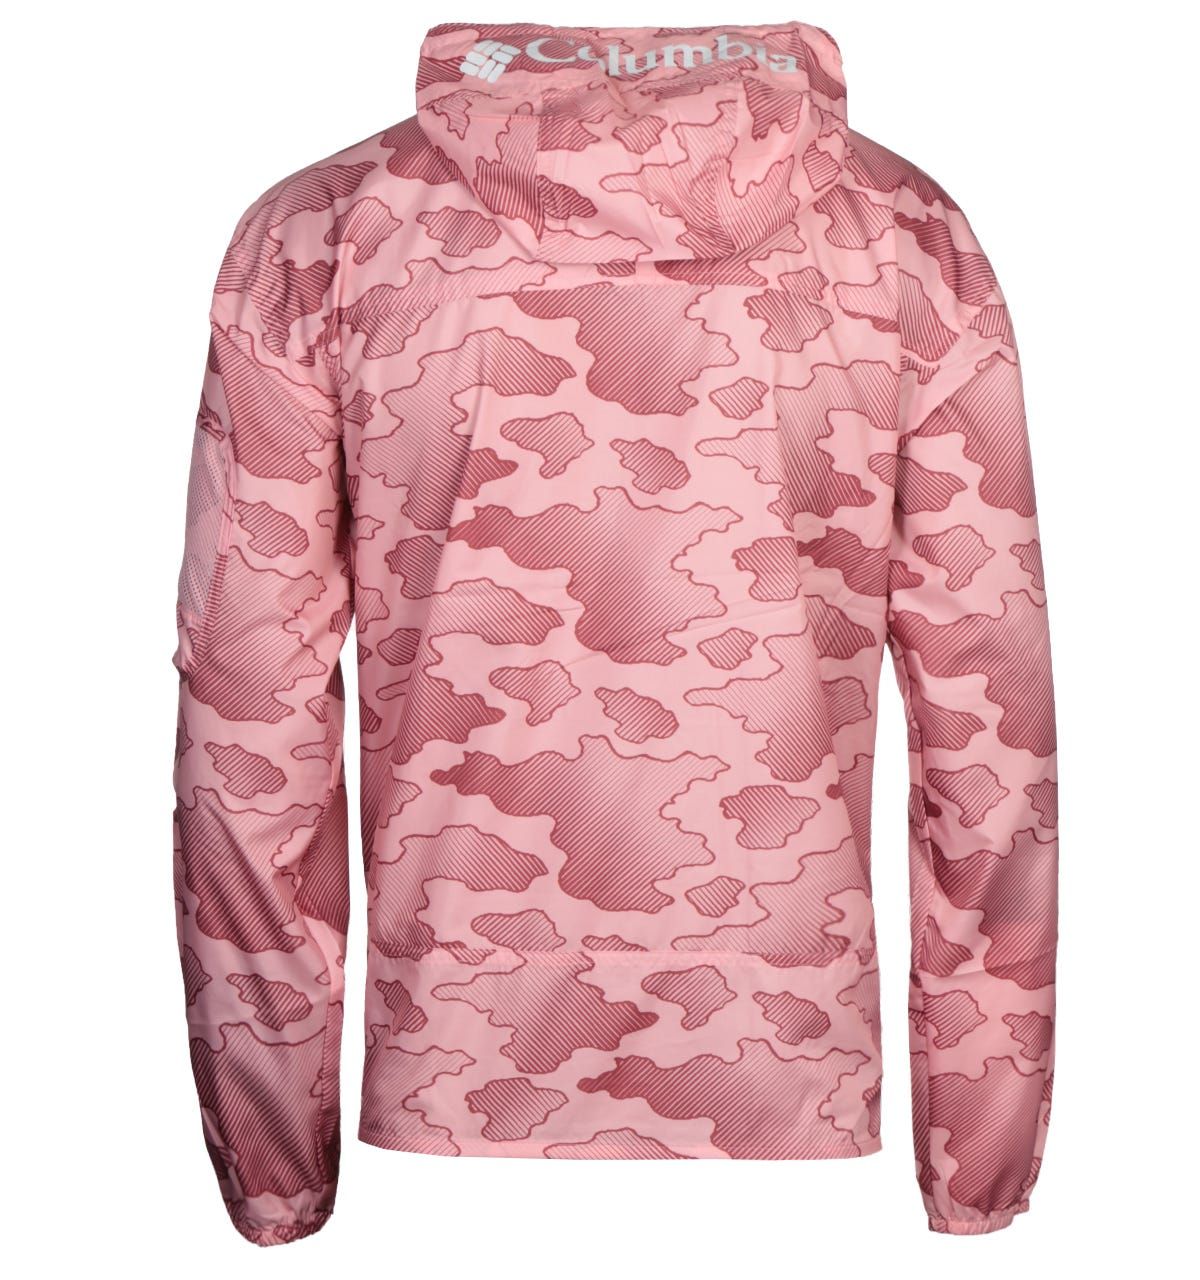 <p>This is the Challenger Windbreaker Jacket in Red Camo by Columbia. Columbia Sportswear is a global outdoor brand based in Portland. They specialise in crafting active lifestyle gear with industry leading technologies. Columbia\'s apparel, footwear, and accessories reflect their Pacific Northwest heritage and indomitable spirit.</p><ul><li>Synthetic composition </li><li>Drawstring hood </li><li>Twin slit pockets at waistline </li><li>Two-tone panelled design </li><li>Elasticated sleeve cuffs</li><li>Flap pocket at chest with velcro & zip closure</li><li>Quarter-zip placket with velcro & zip closure</li><li>Columbia logo printed at flap pocket</li></ul><p>Style & Fit</p><ul><li>Regular Fit</li></ul><p>Composition & Care</p><ul><li>100% Polyester</li><li>Machine Wash</li></ul>